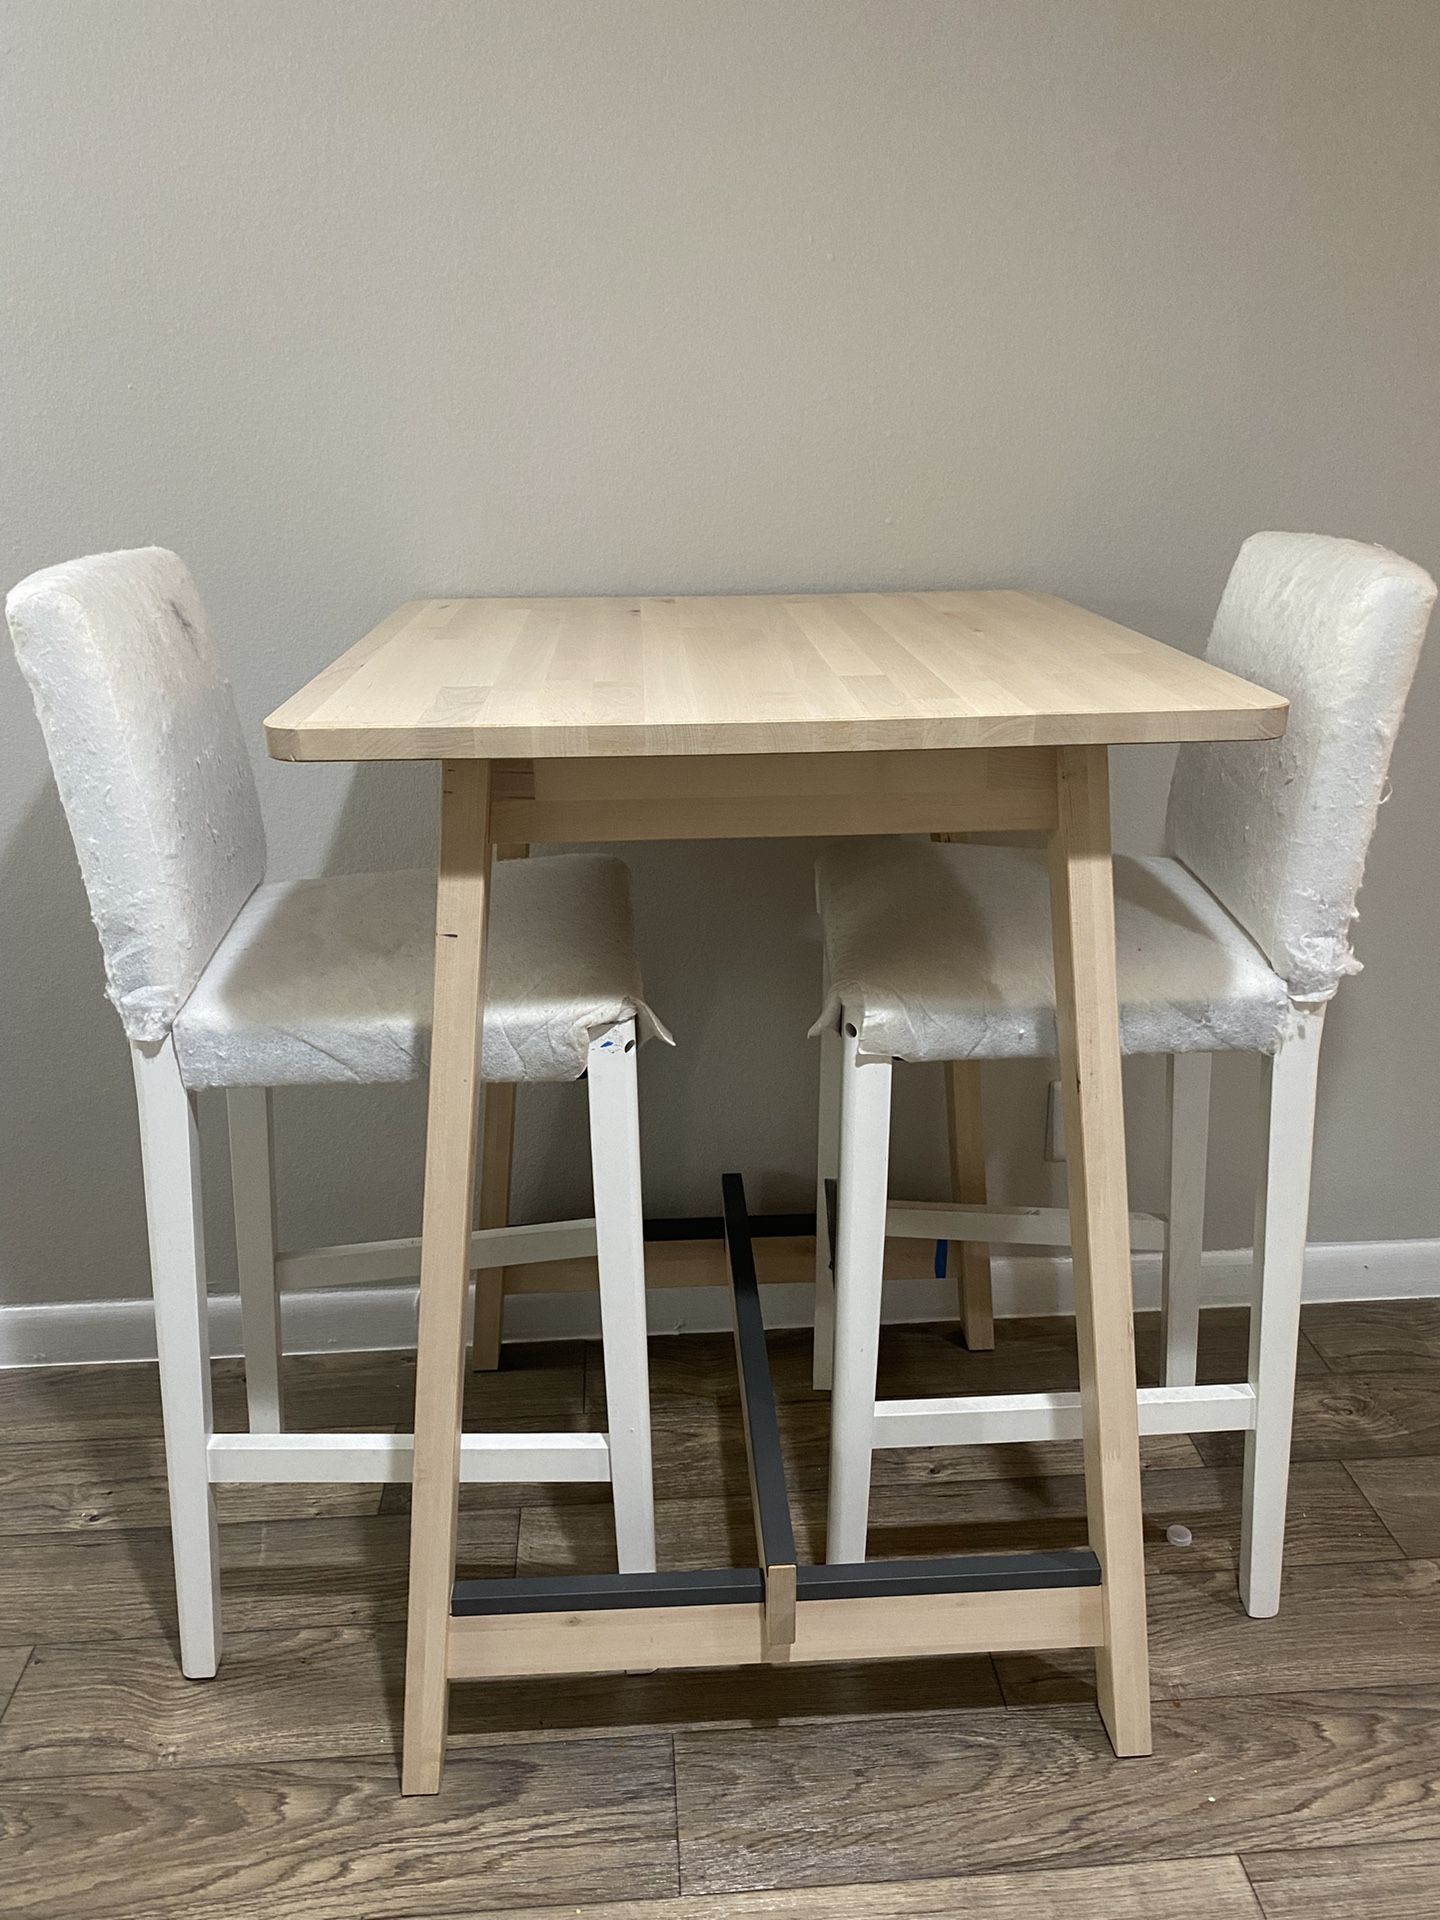 Wooden Dinning Table + Two FREE Chairs Included